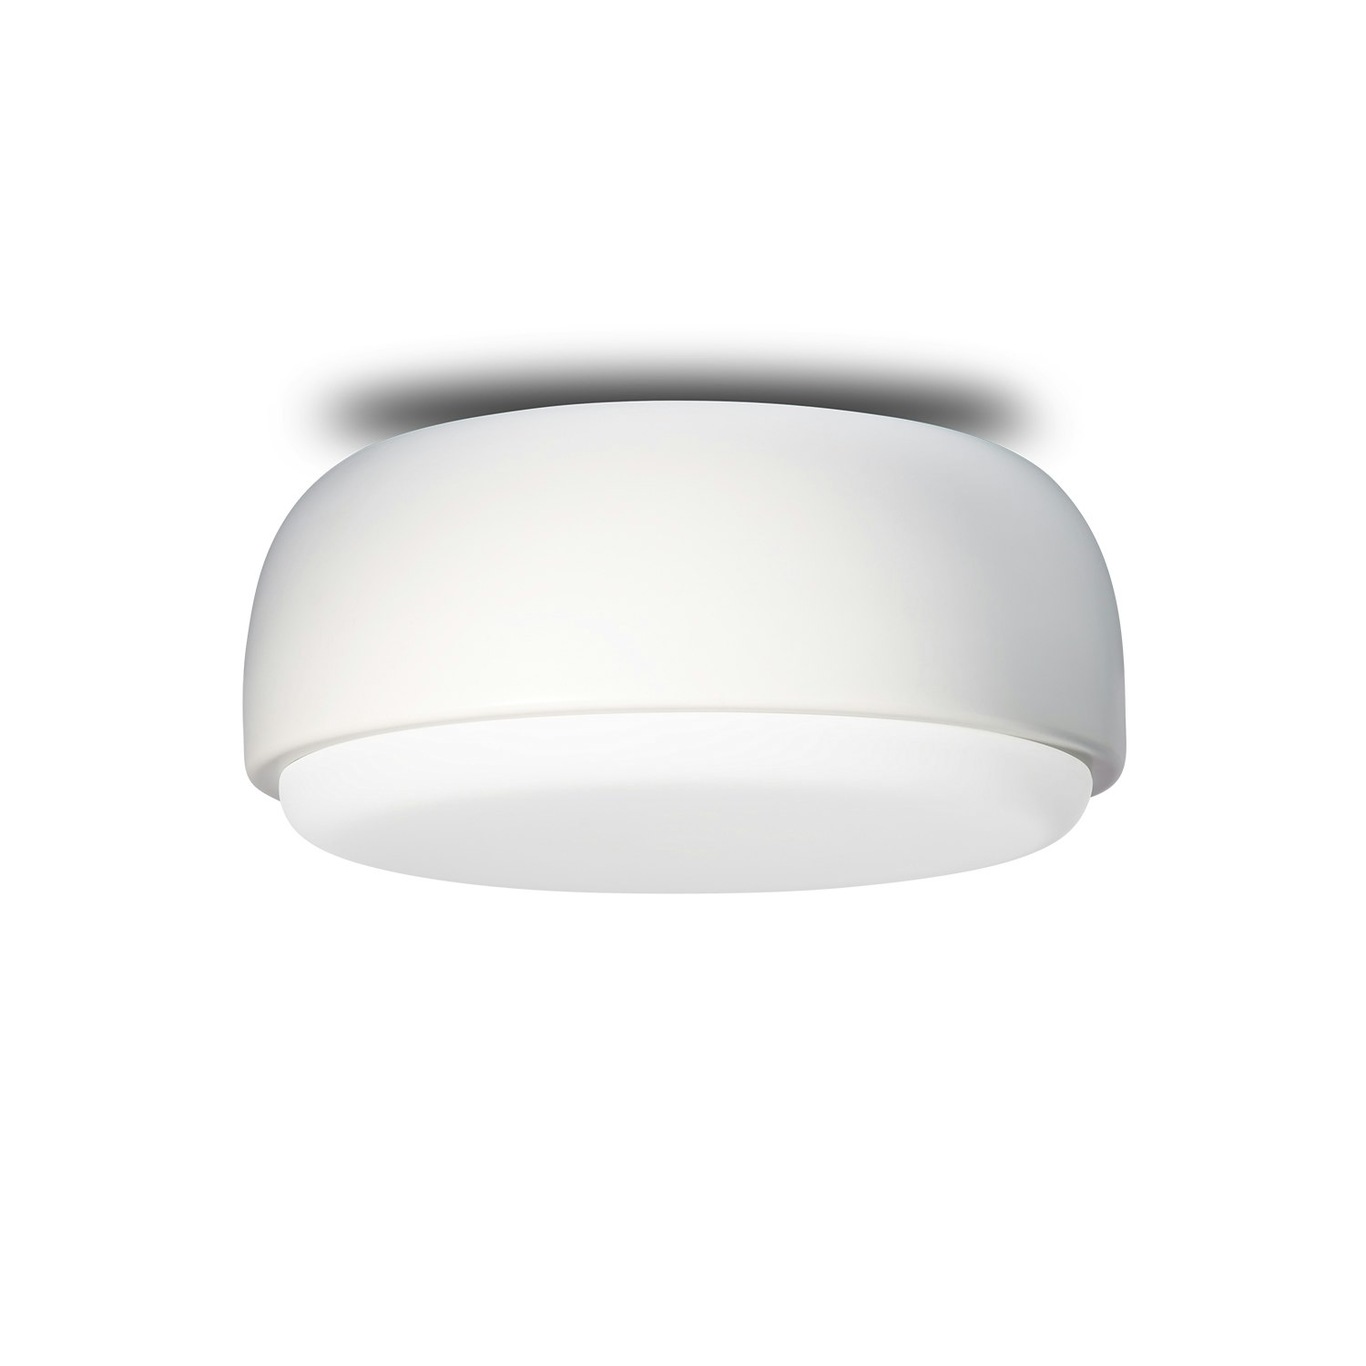 Over Me 30 Ceiling/Wall Lamp, White